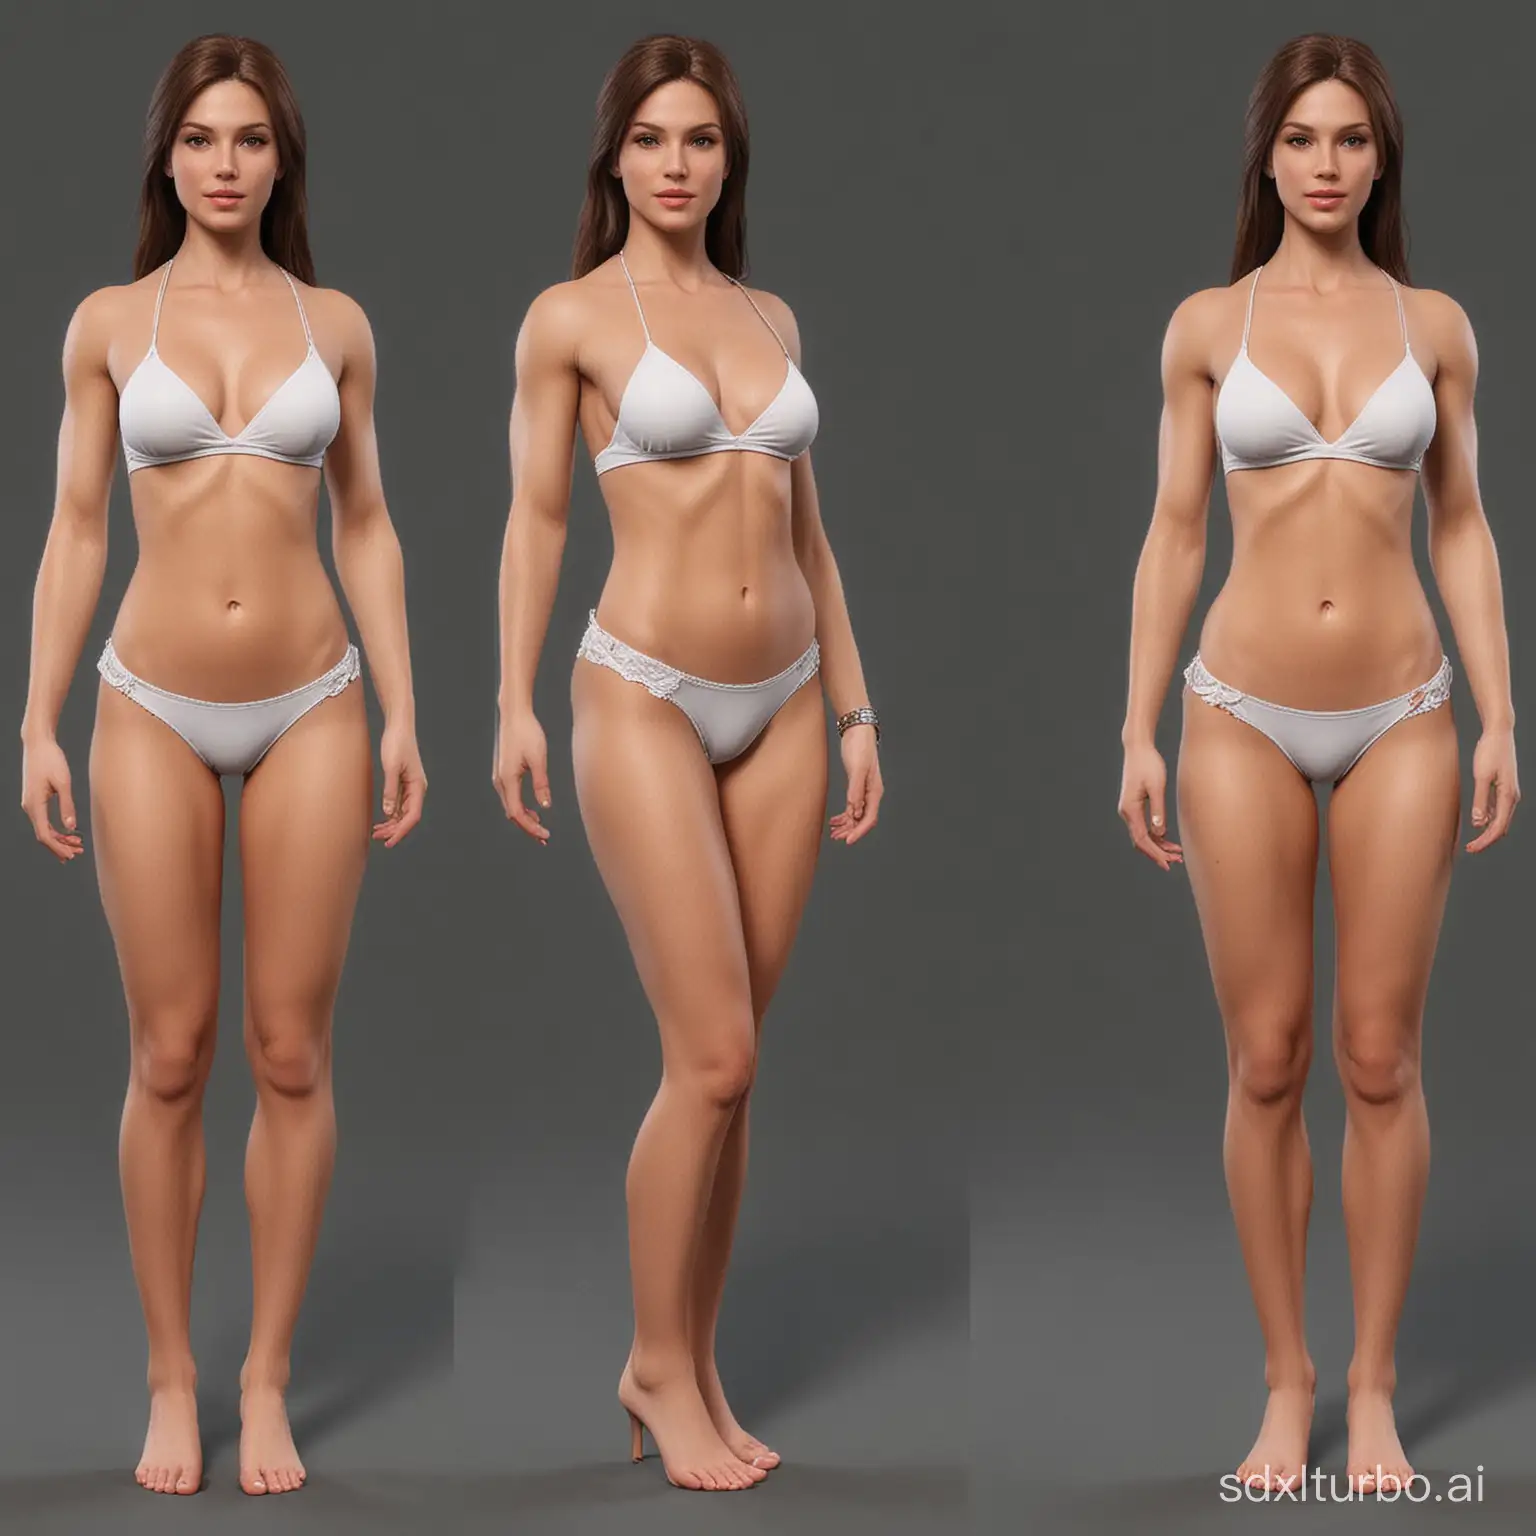 "UPGRADE CREATING A CUSTOM MODEL IS LIMITED TO PRO USERS. EACH MODEL female